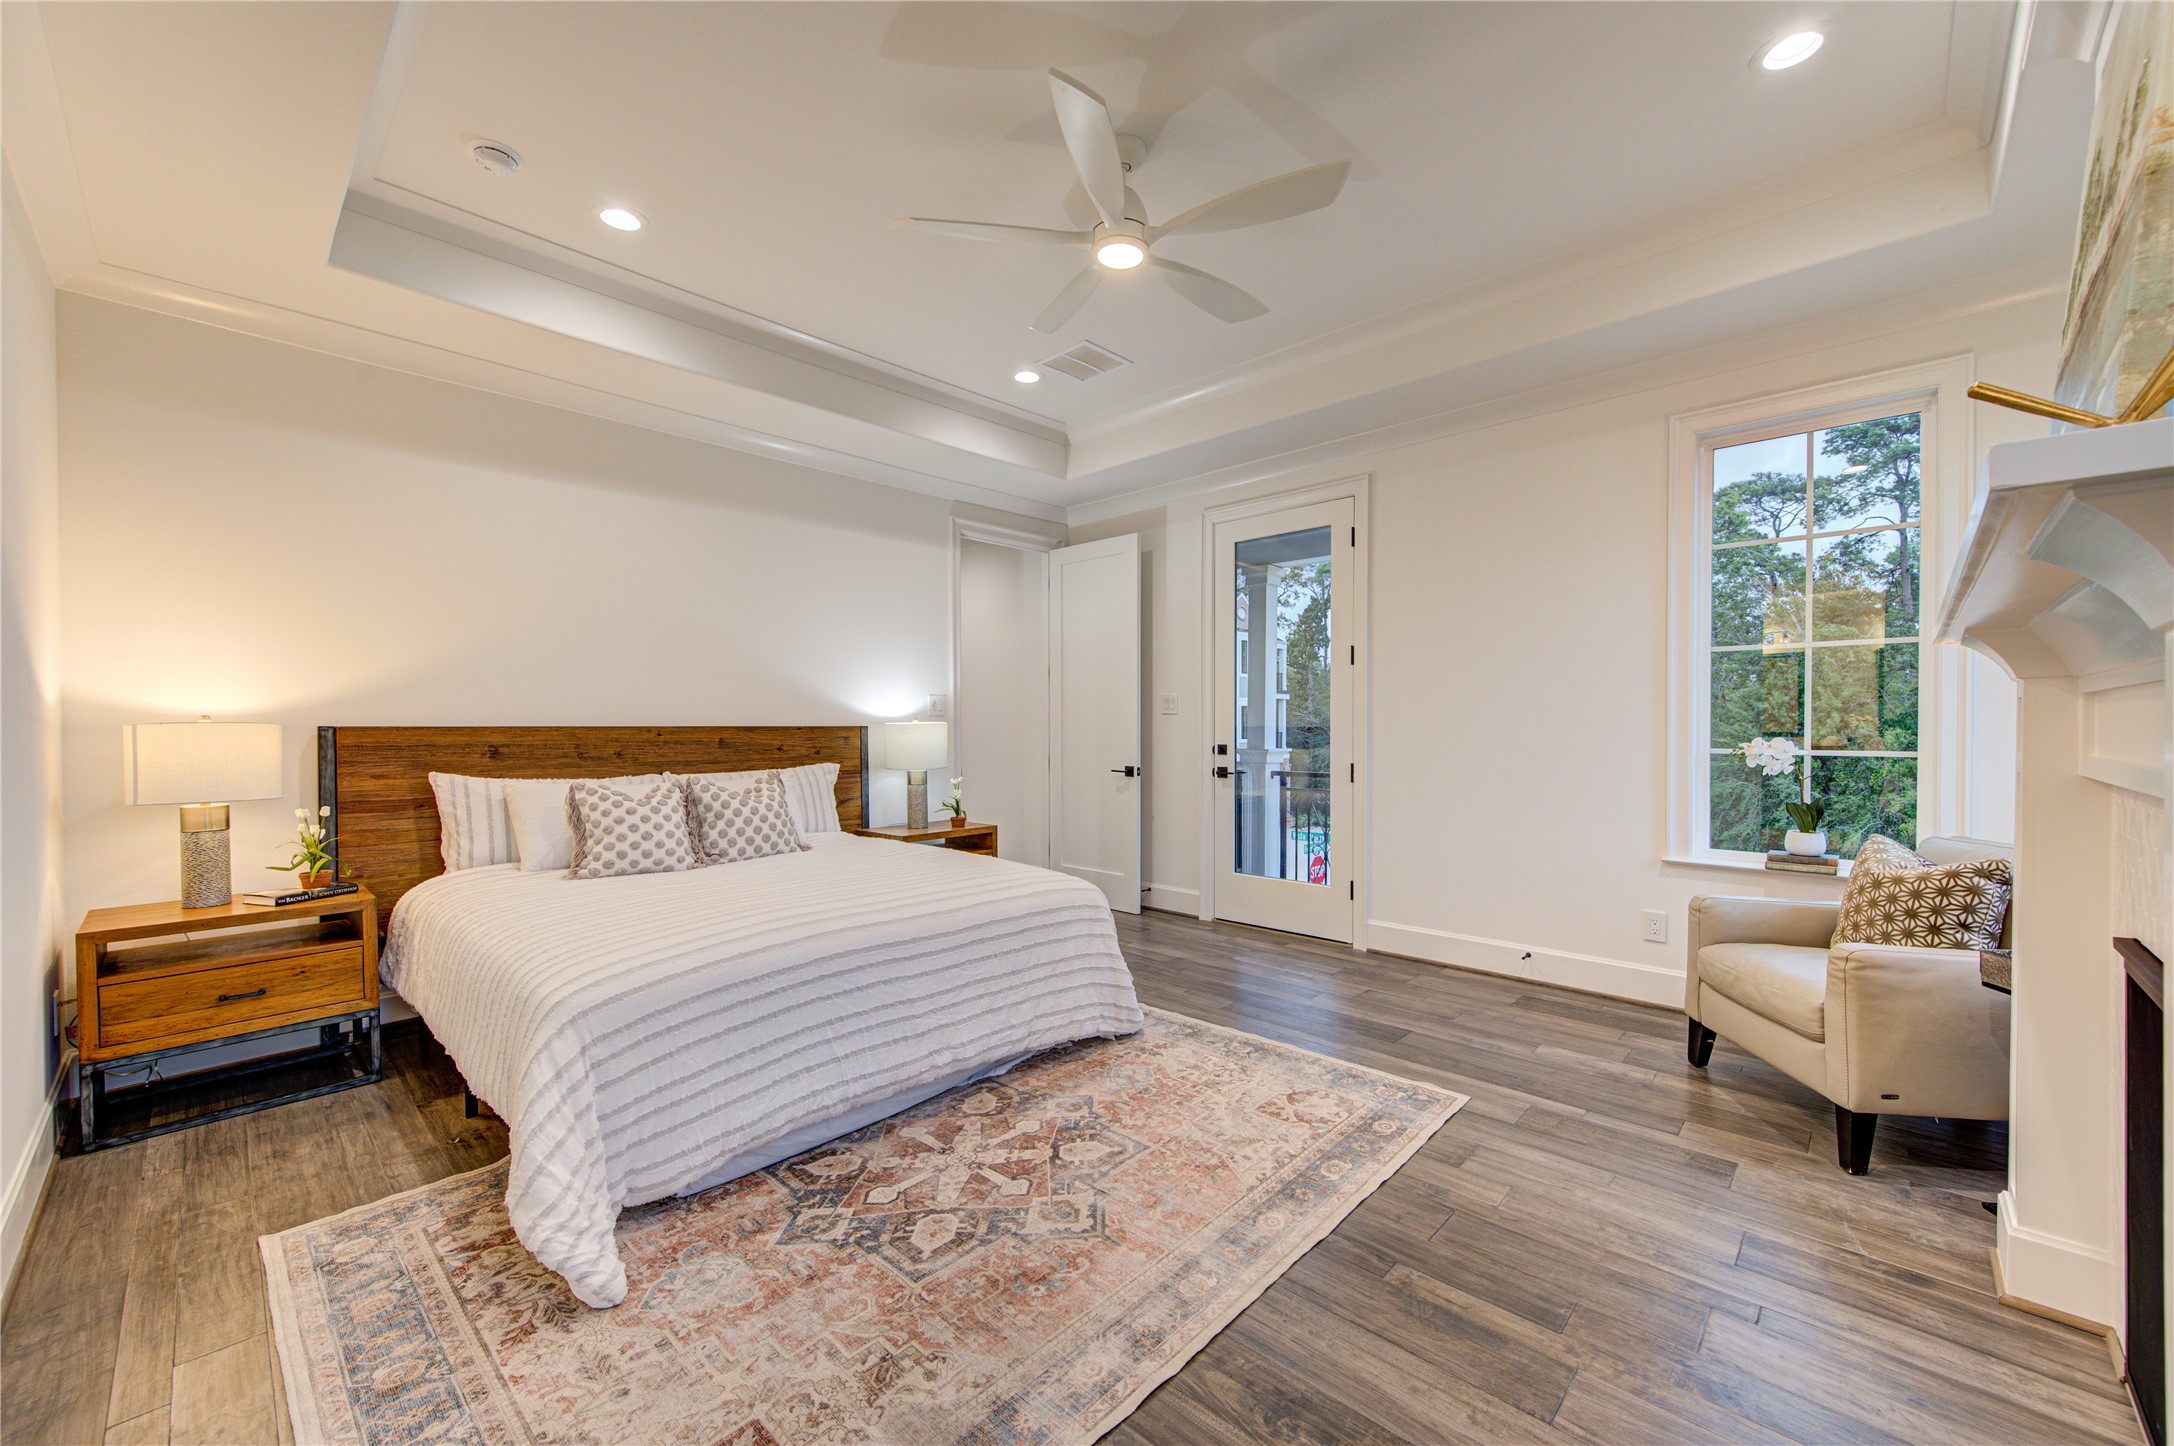 A spacious second floor primary bedroom boasts coffered ceilings, lots of windows, and wood floors.